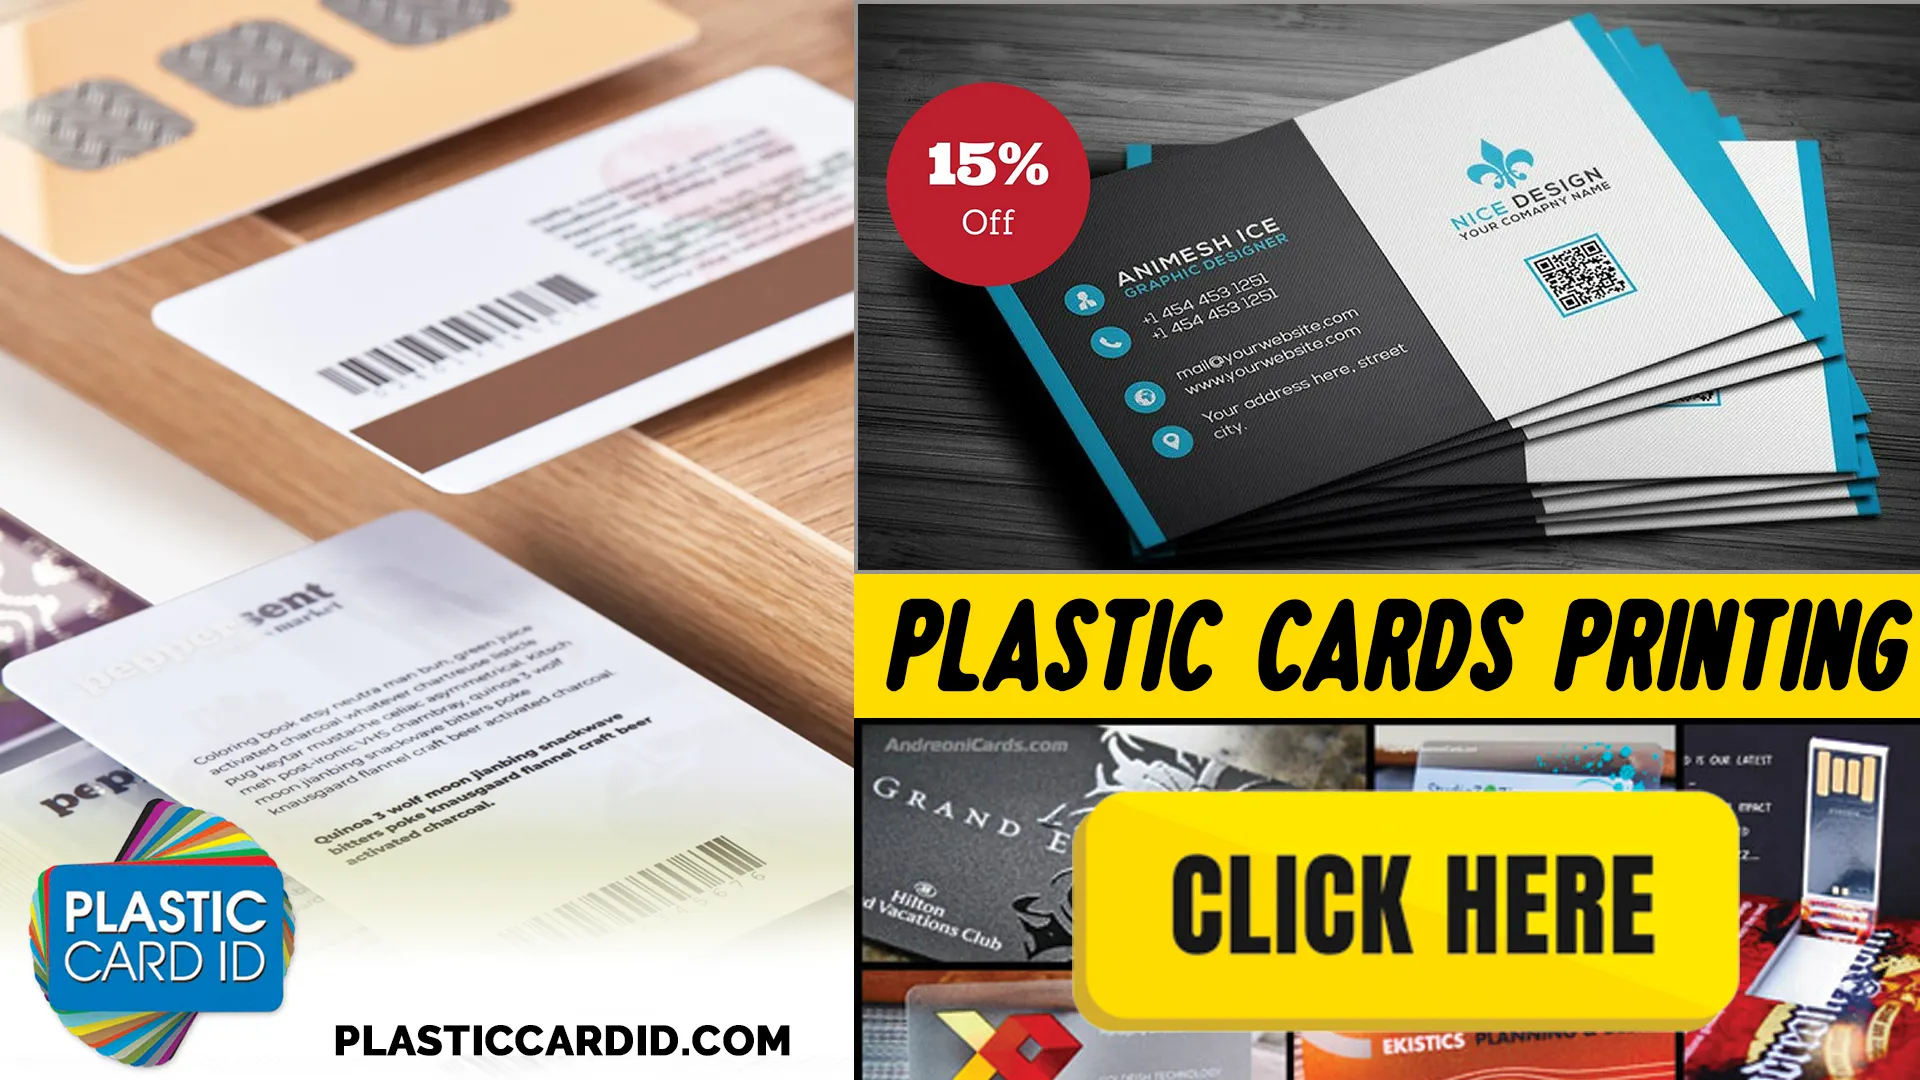 Embrace the Power of High-Tech Printing with Plastic Card ID
